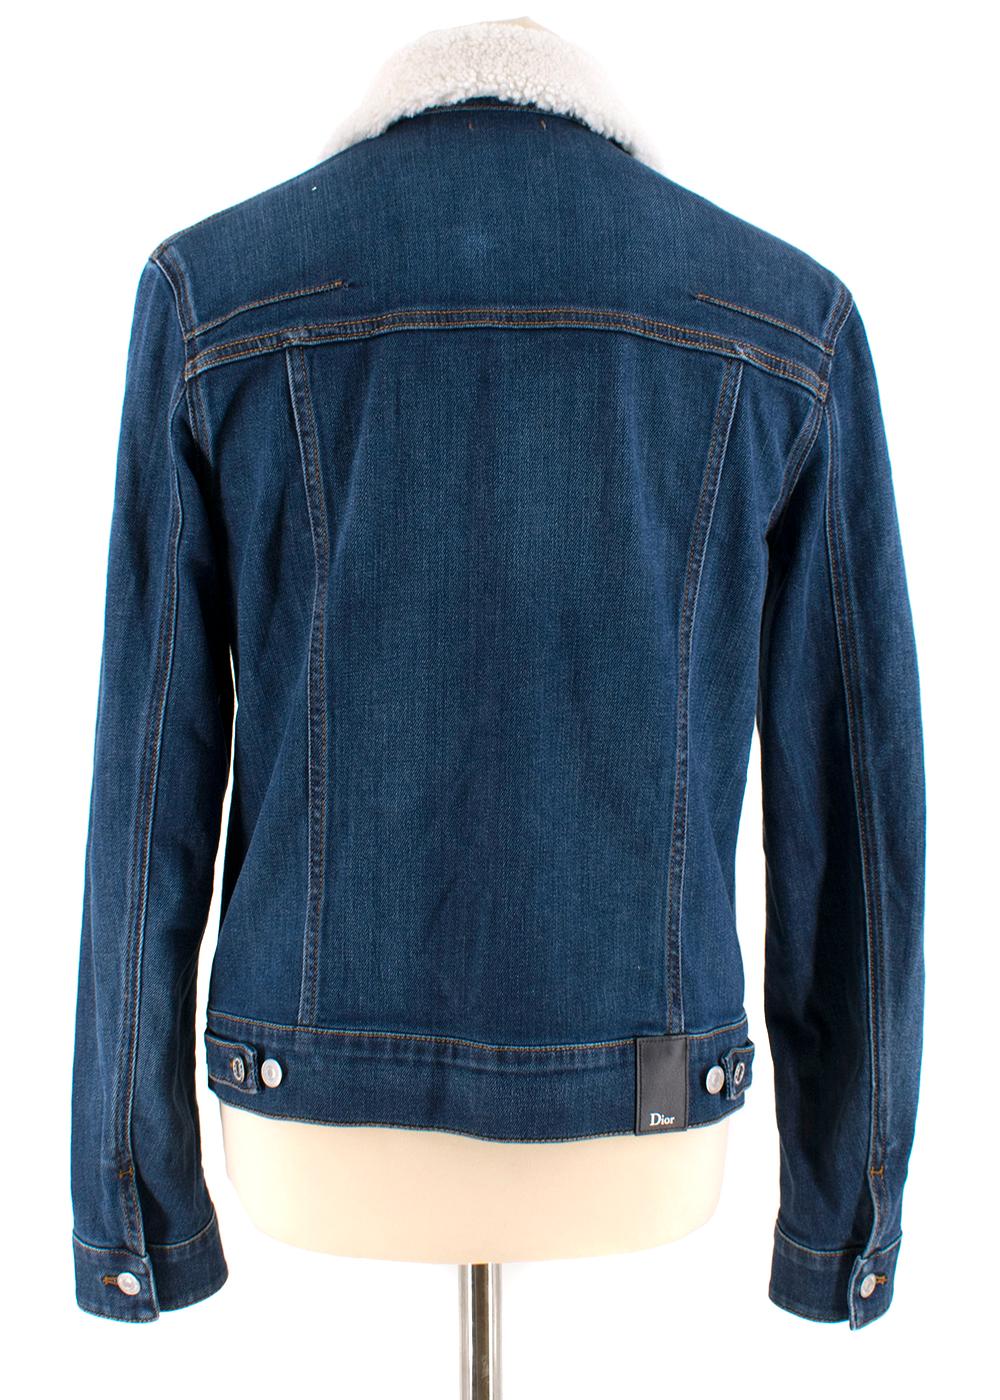 Dior Homme Blue Denim Jacket with Shearling Trim - Size Large - 50 EU In New Condition For Sale In London, GB